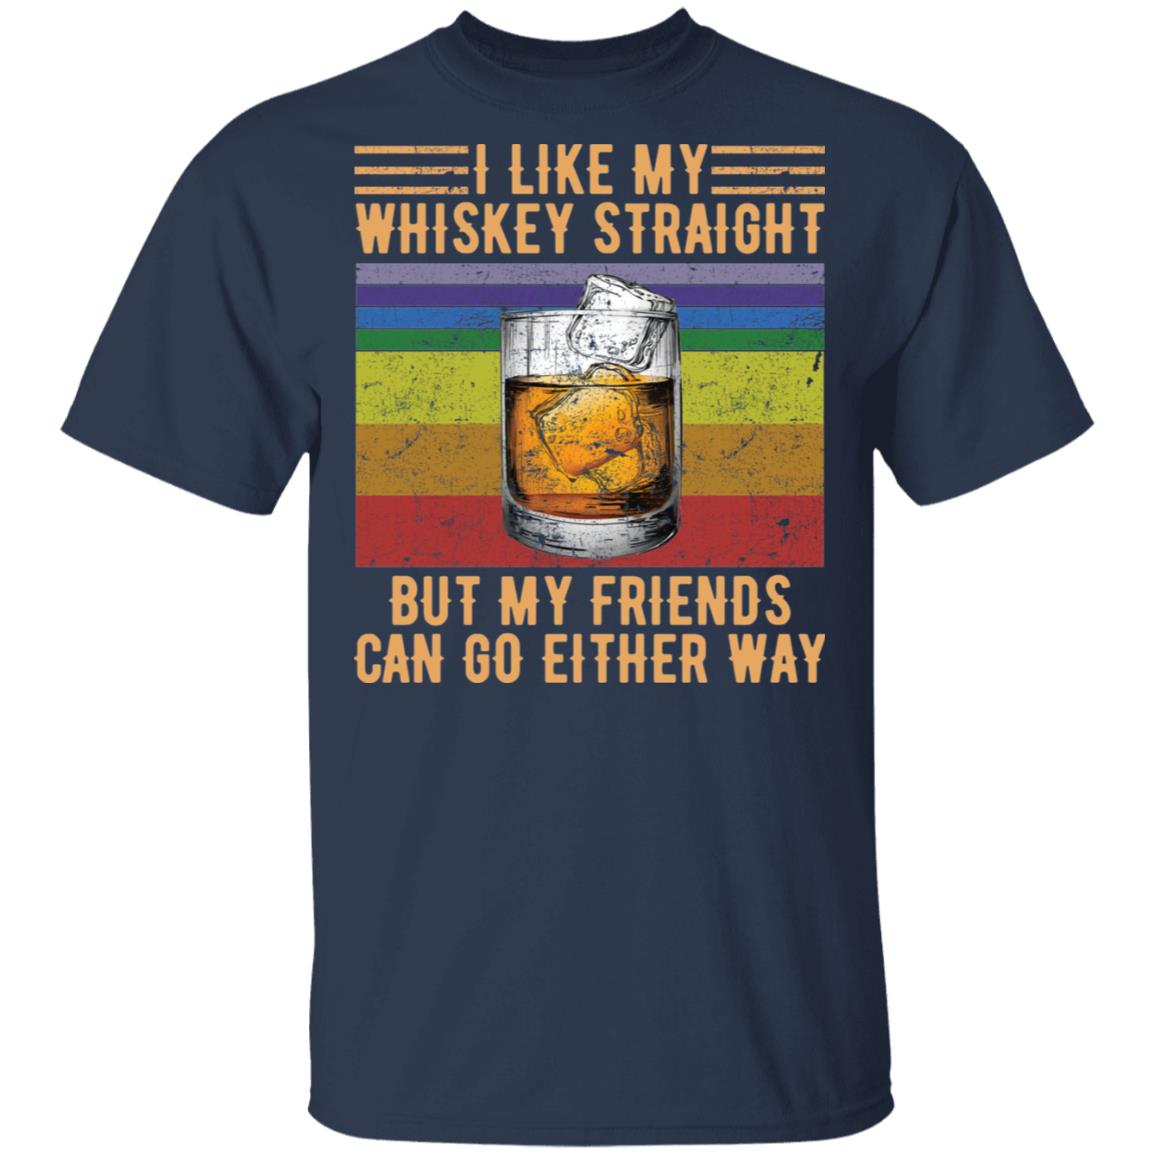 I like my Whiskey straight but my friends can go either way vintage ...